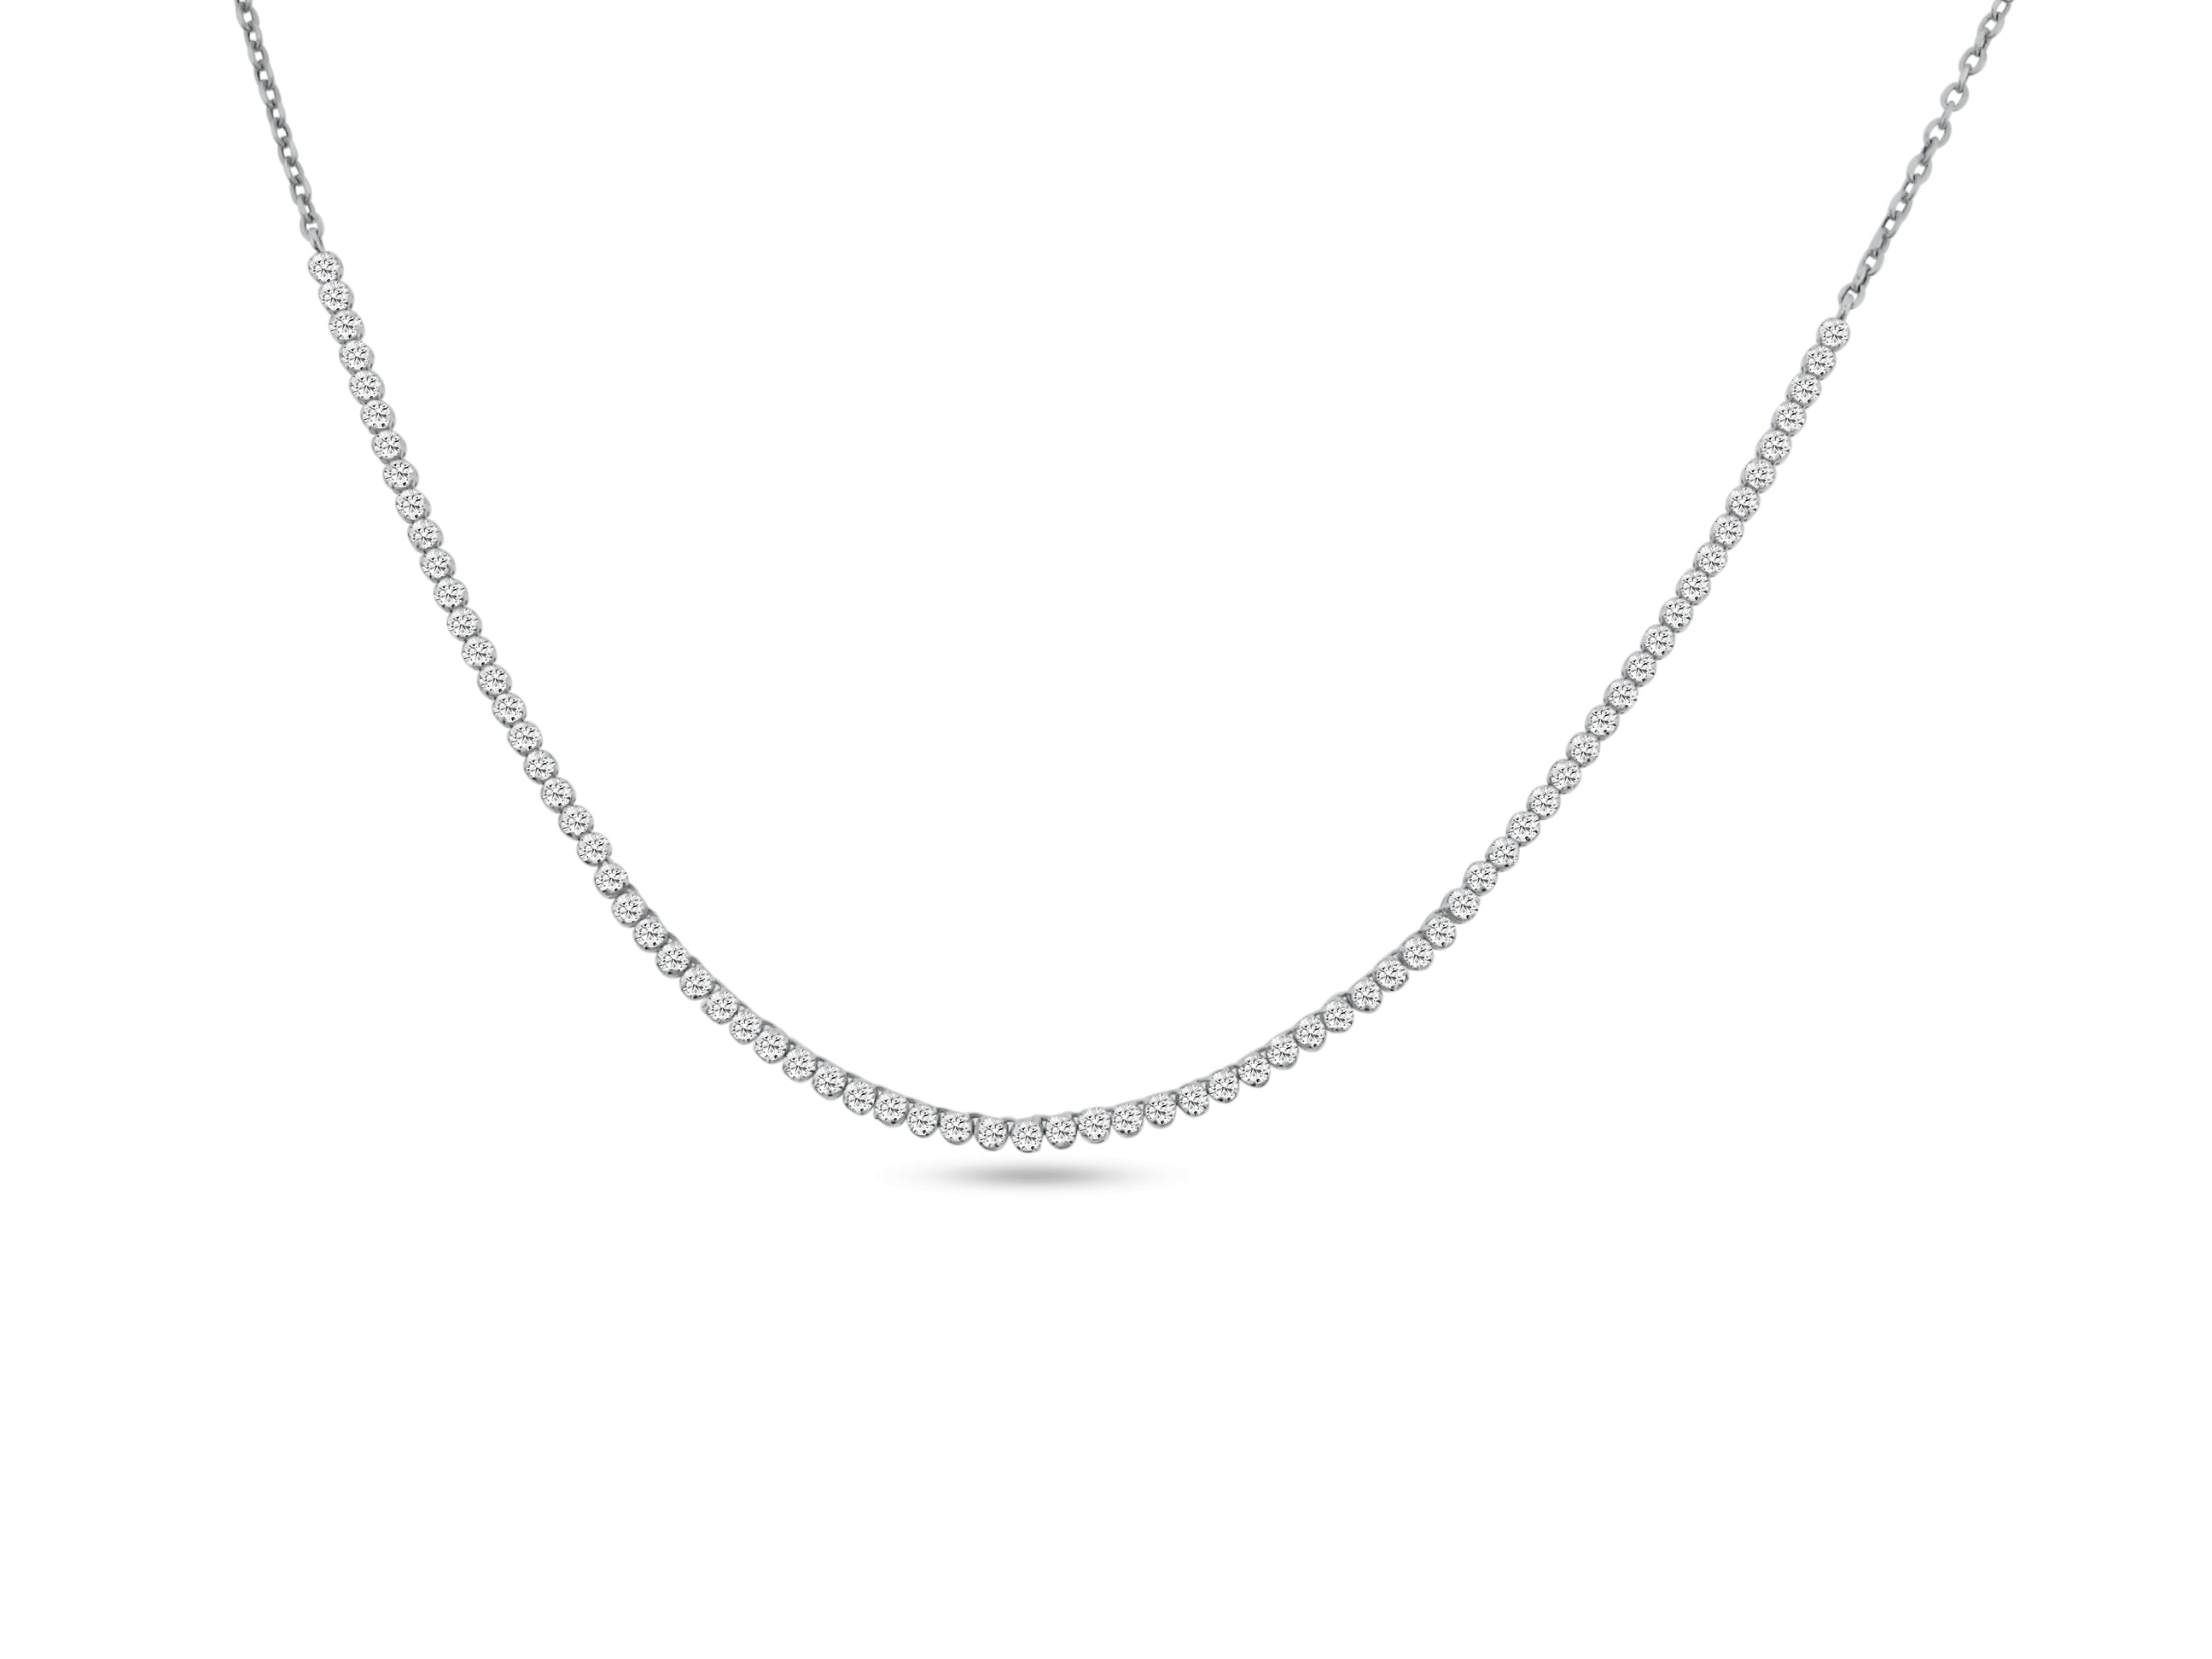 MULLOYS PRIVE 14K WHITE GOLD 1.72CT  SI1 CLARITY G COLOR  DIAMOND TENNIS NECKLACE.